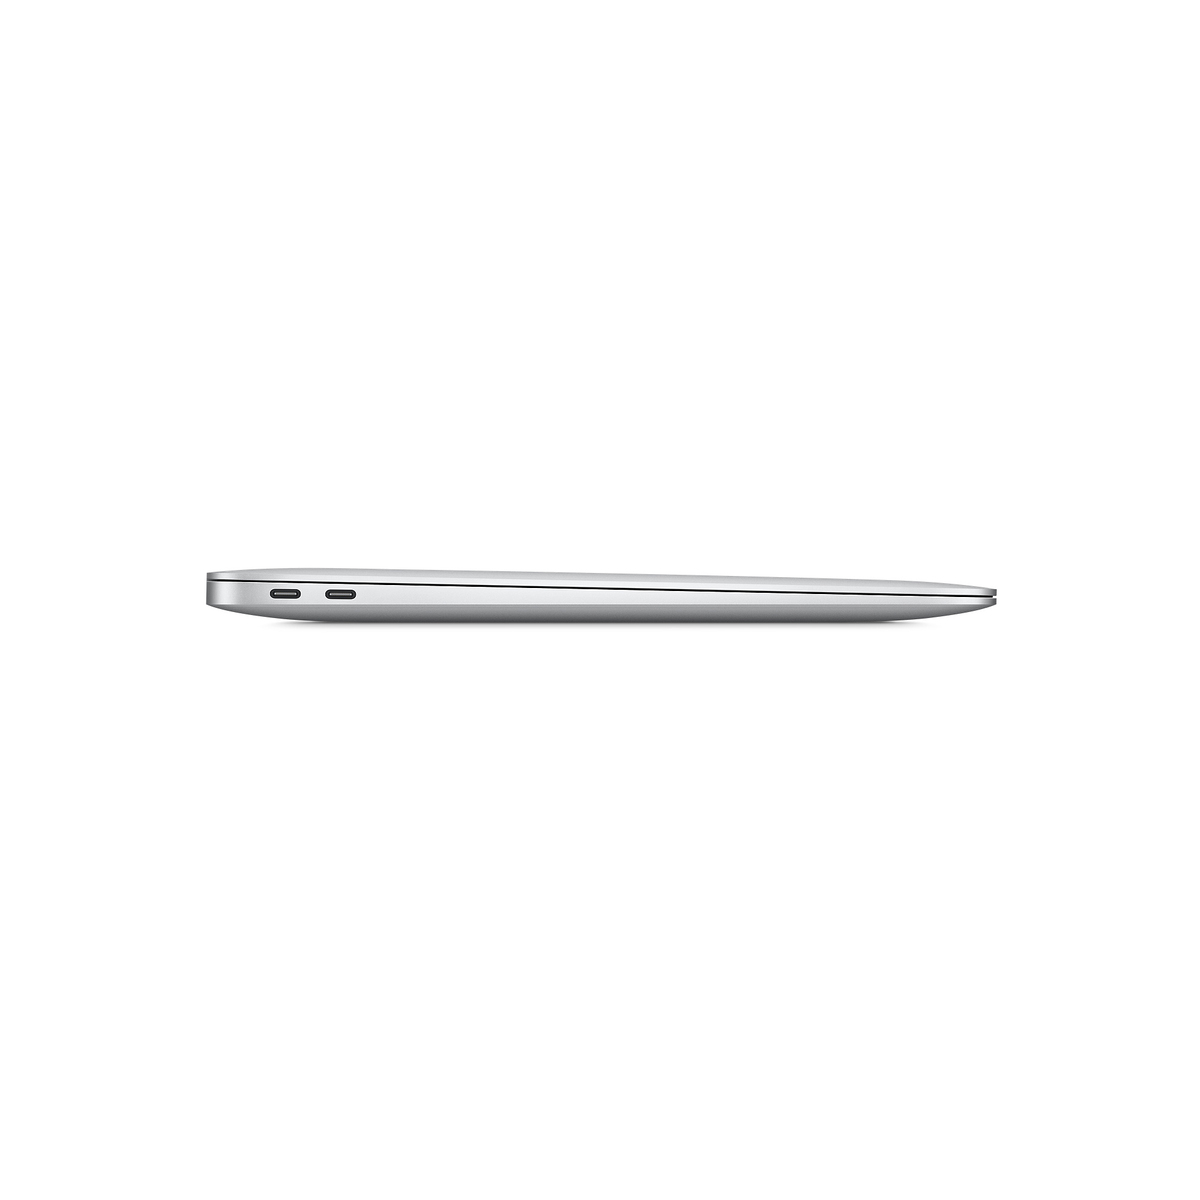 Apple MacBook Air 13"(MGN93AB/A), Apple M1 chip with 8-core CPU and 7-core GPU, 256GB - Silver